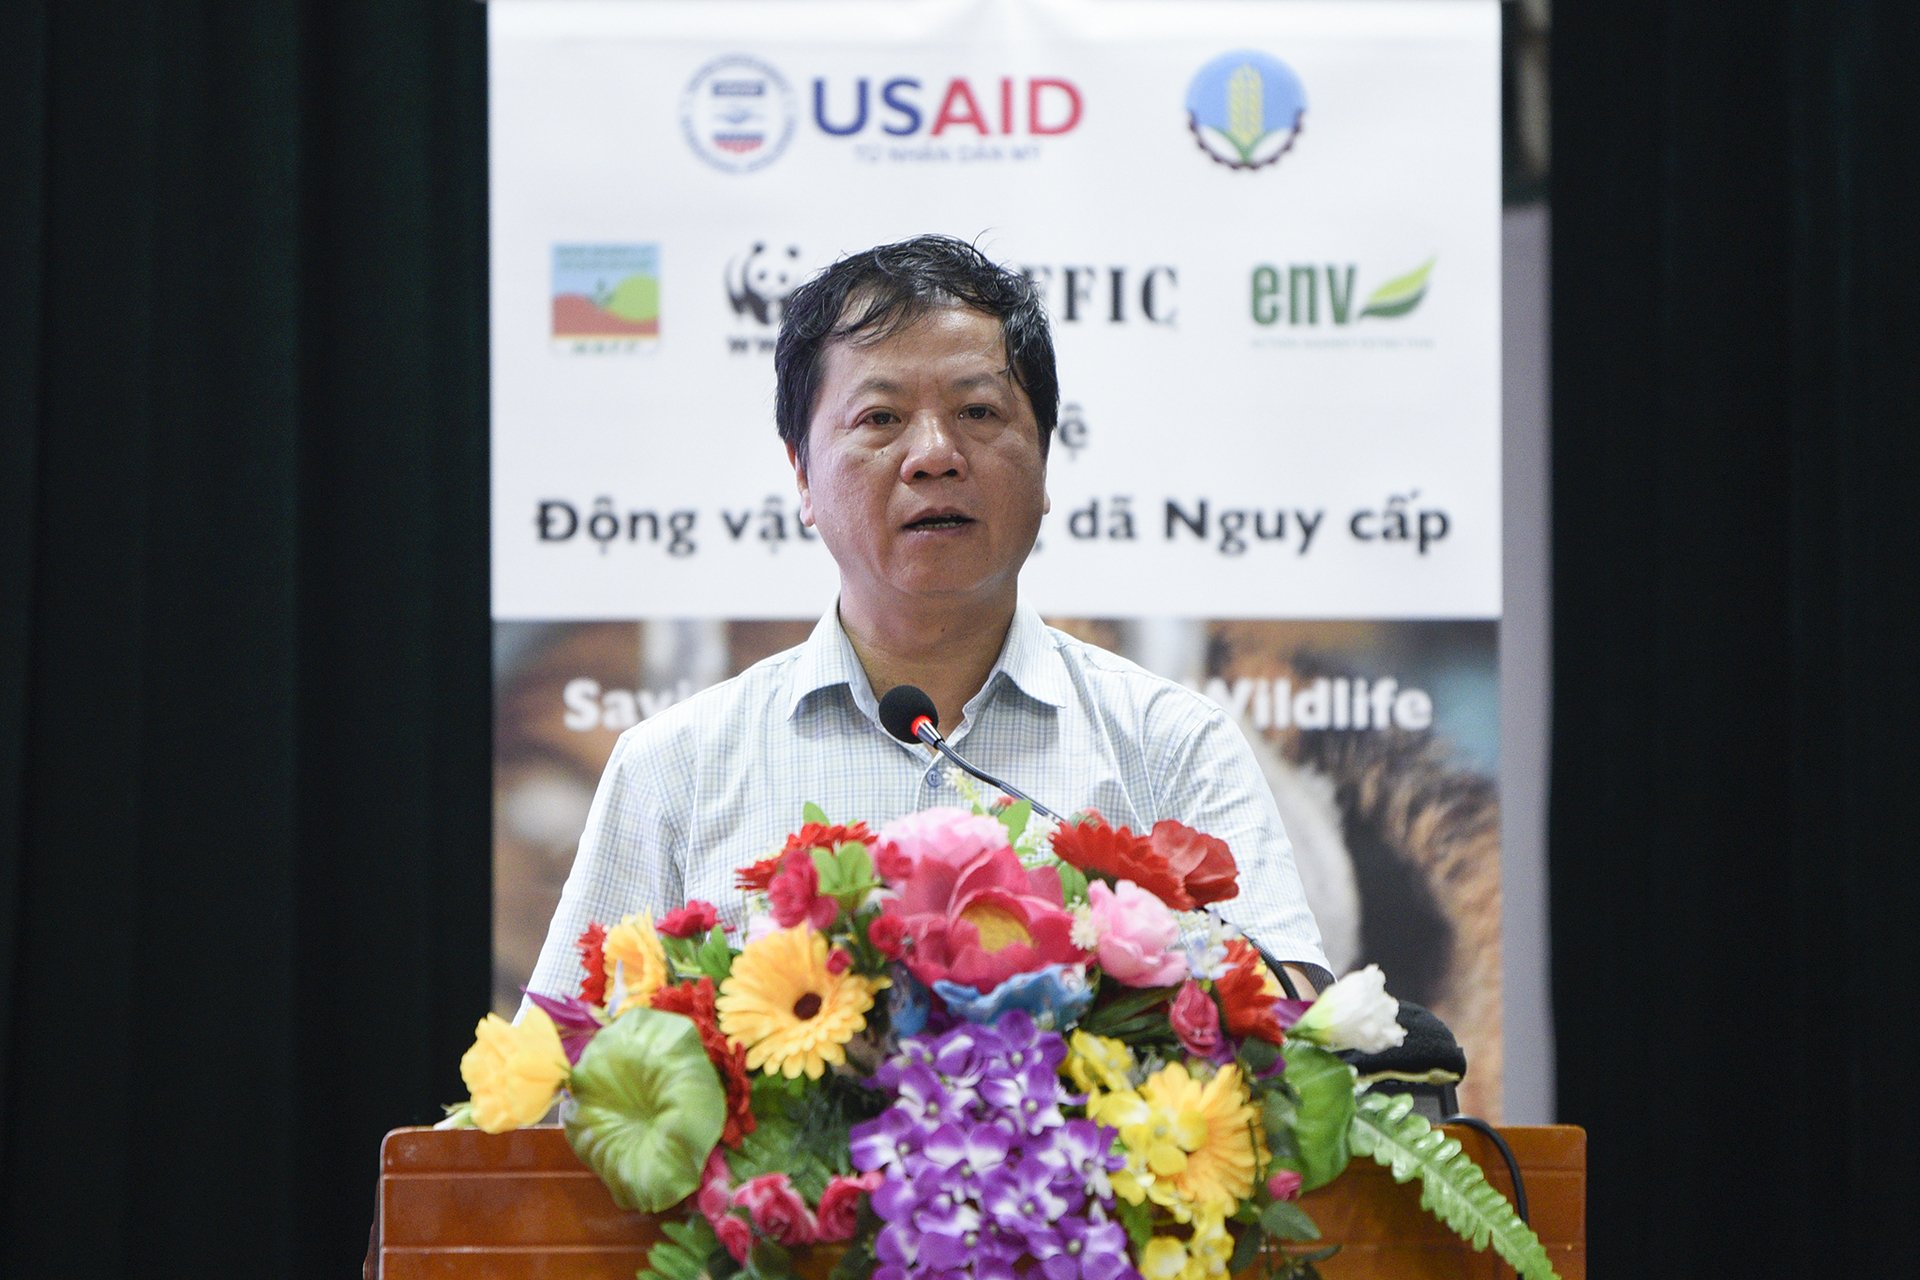 Mr. Do Quang Tung, Director of the Forest Project Management Unit, delivered the opening speech. Photo: Tung Dinh.